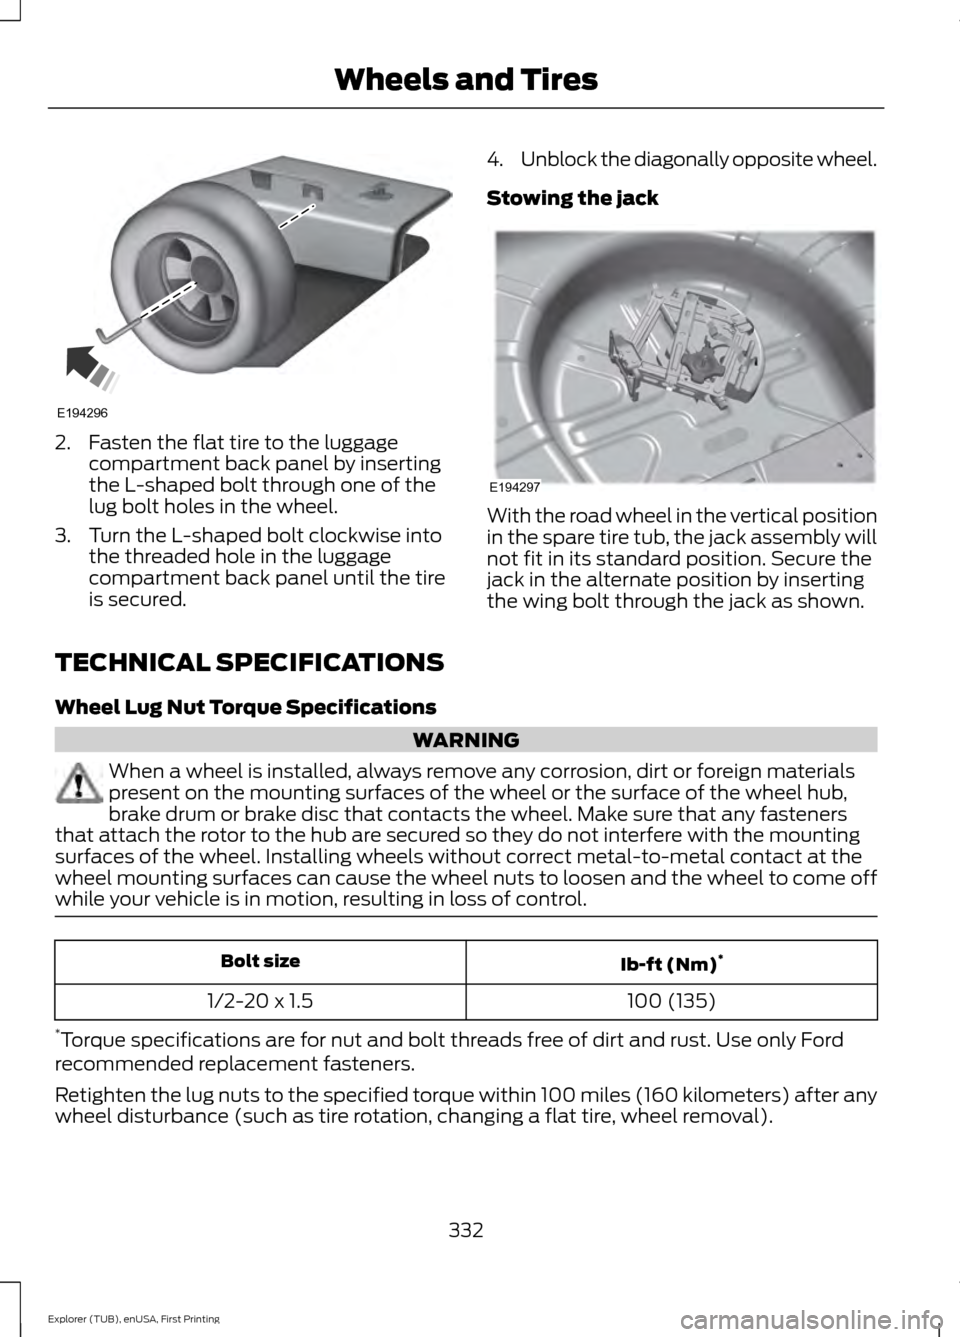 FORD EXPLORER 2016 5.G Owners Manual 2. Fasten the flat tire to the luggage
compartment back panel by inserting
the L-shaped bolt through one of the
lug bolt holes in the wheel.
3. Turn the L-shaped bolt clockwise into the threaded hole 